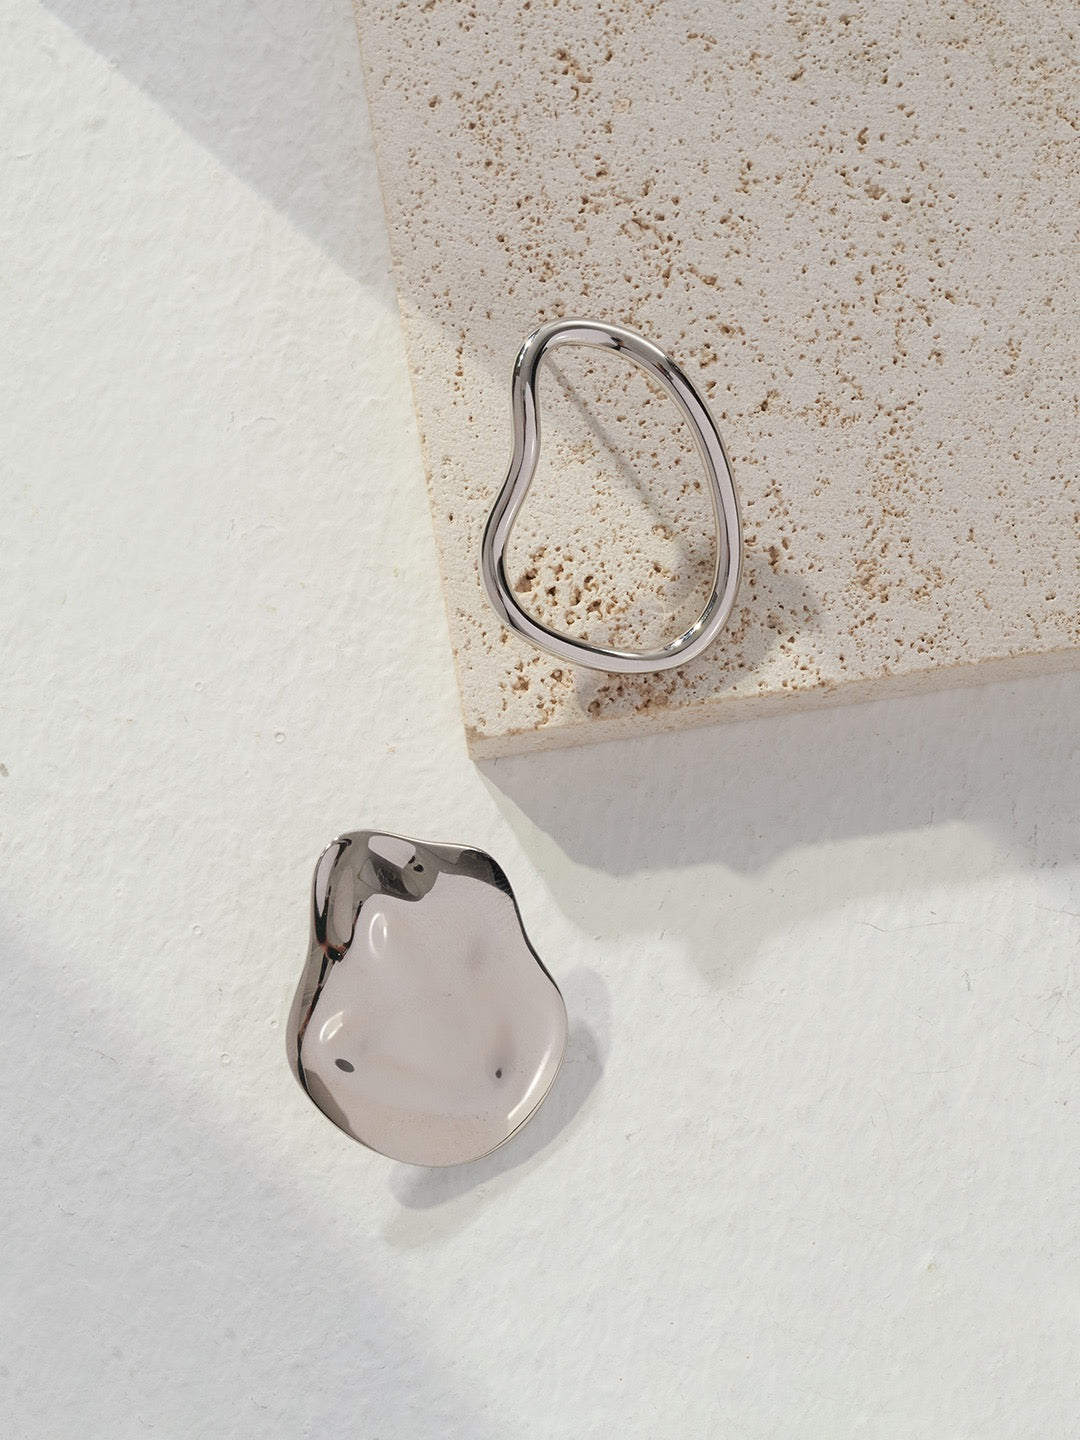 Earrings showcase a striking negative vs positive space design - Elevate your style with Balance in Asymmetry Earrings and embrace the art of unconventional elegance  - S925 Sterling Silver